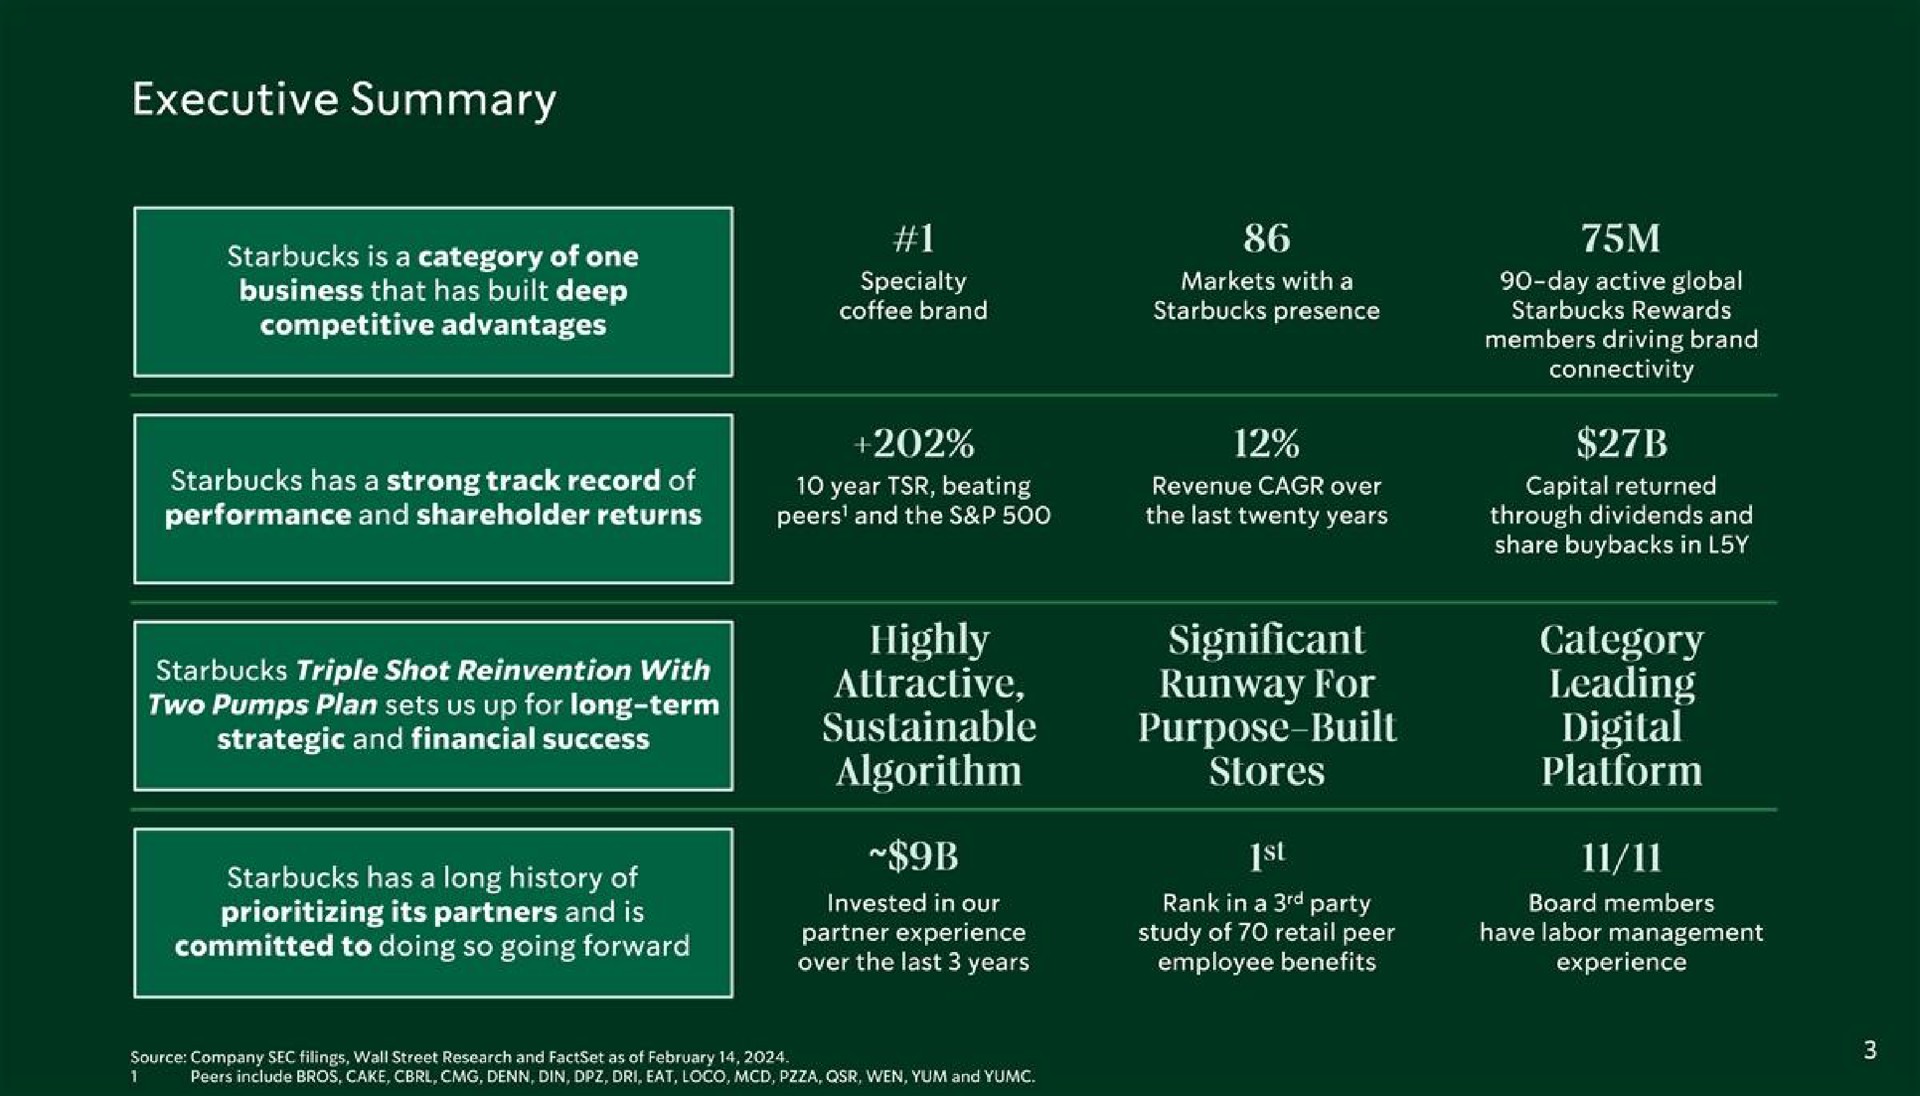 executive summary a highly attractive sustainable algorithm significant runway for purpose stores category leading digital platform | Starbucks